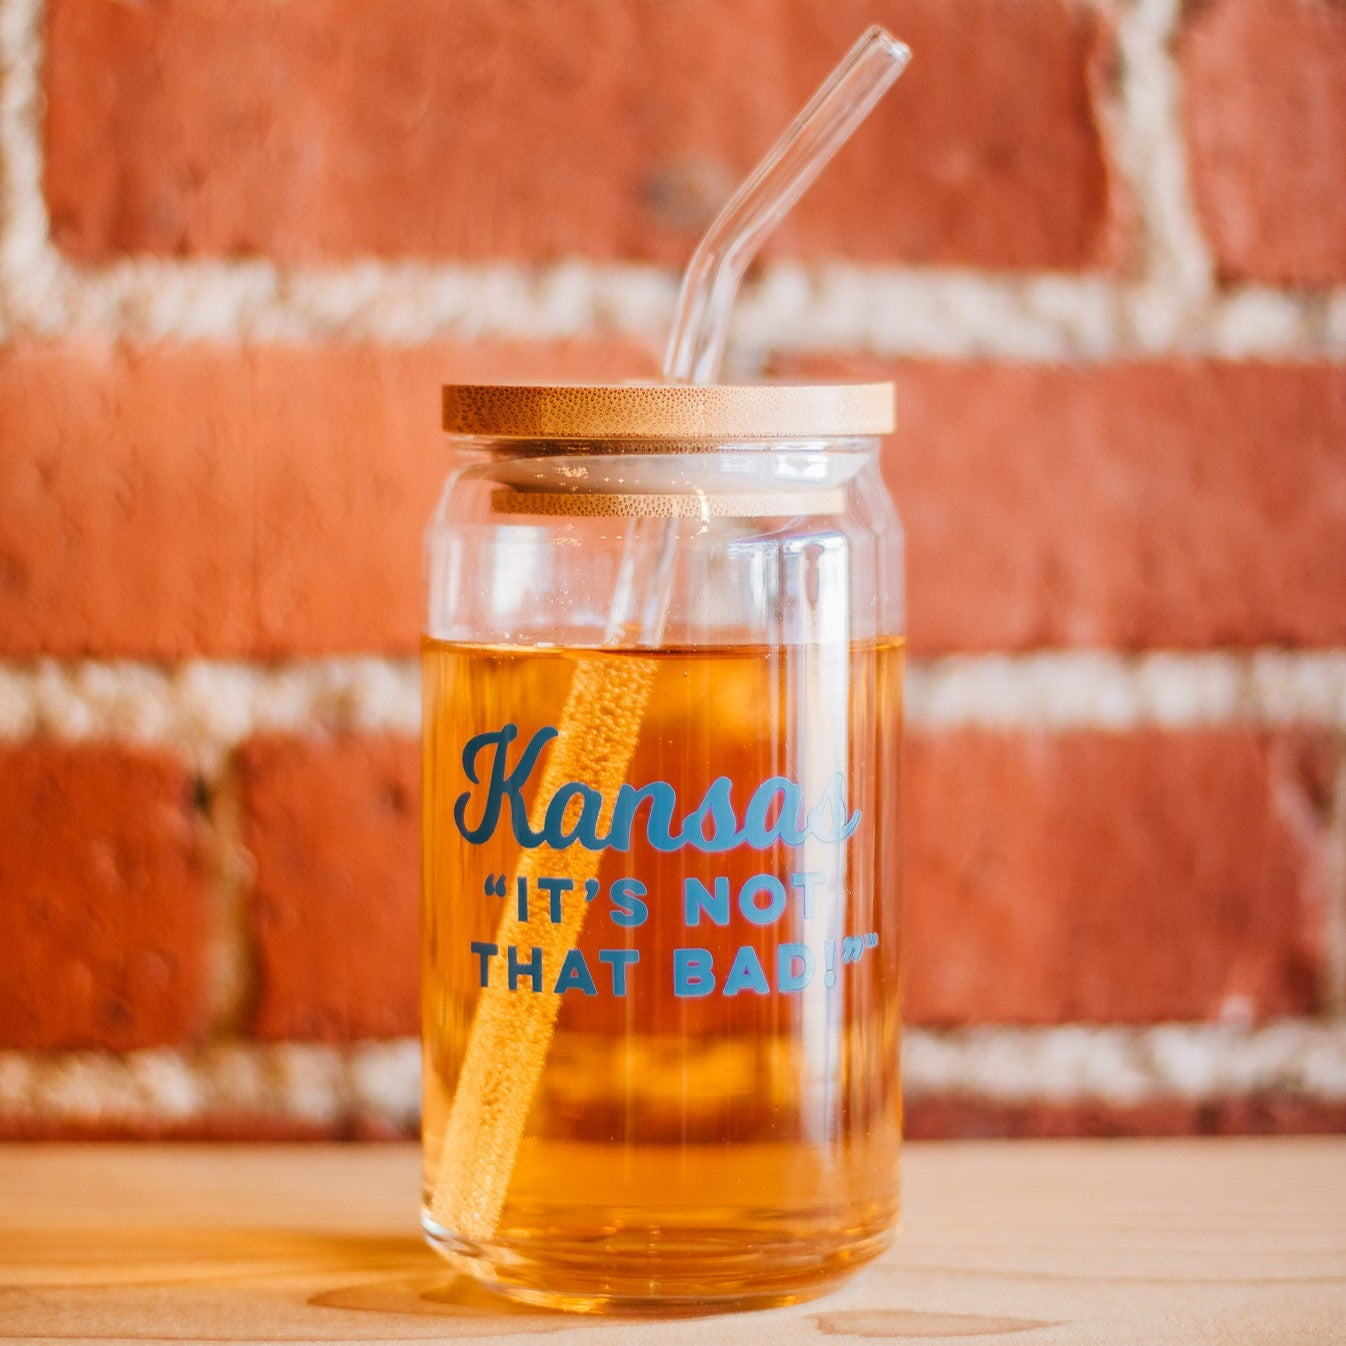 Kansas "It's Not That Bad" Blue Can Glass